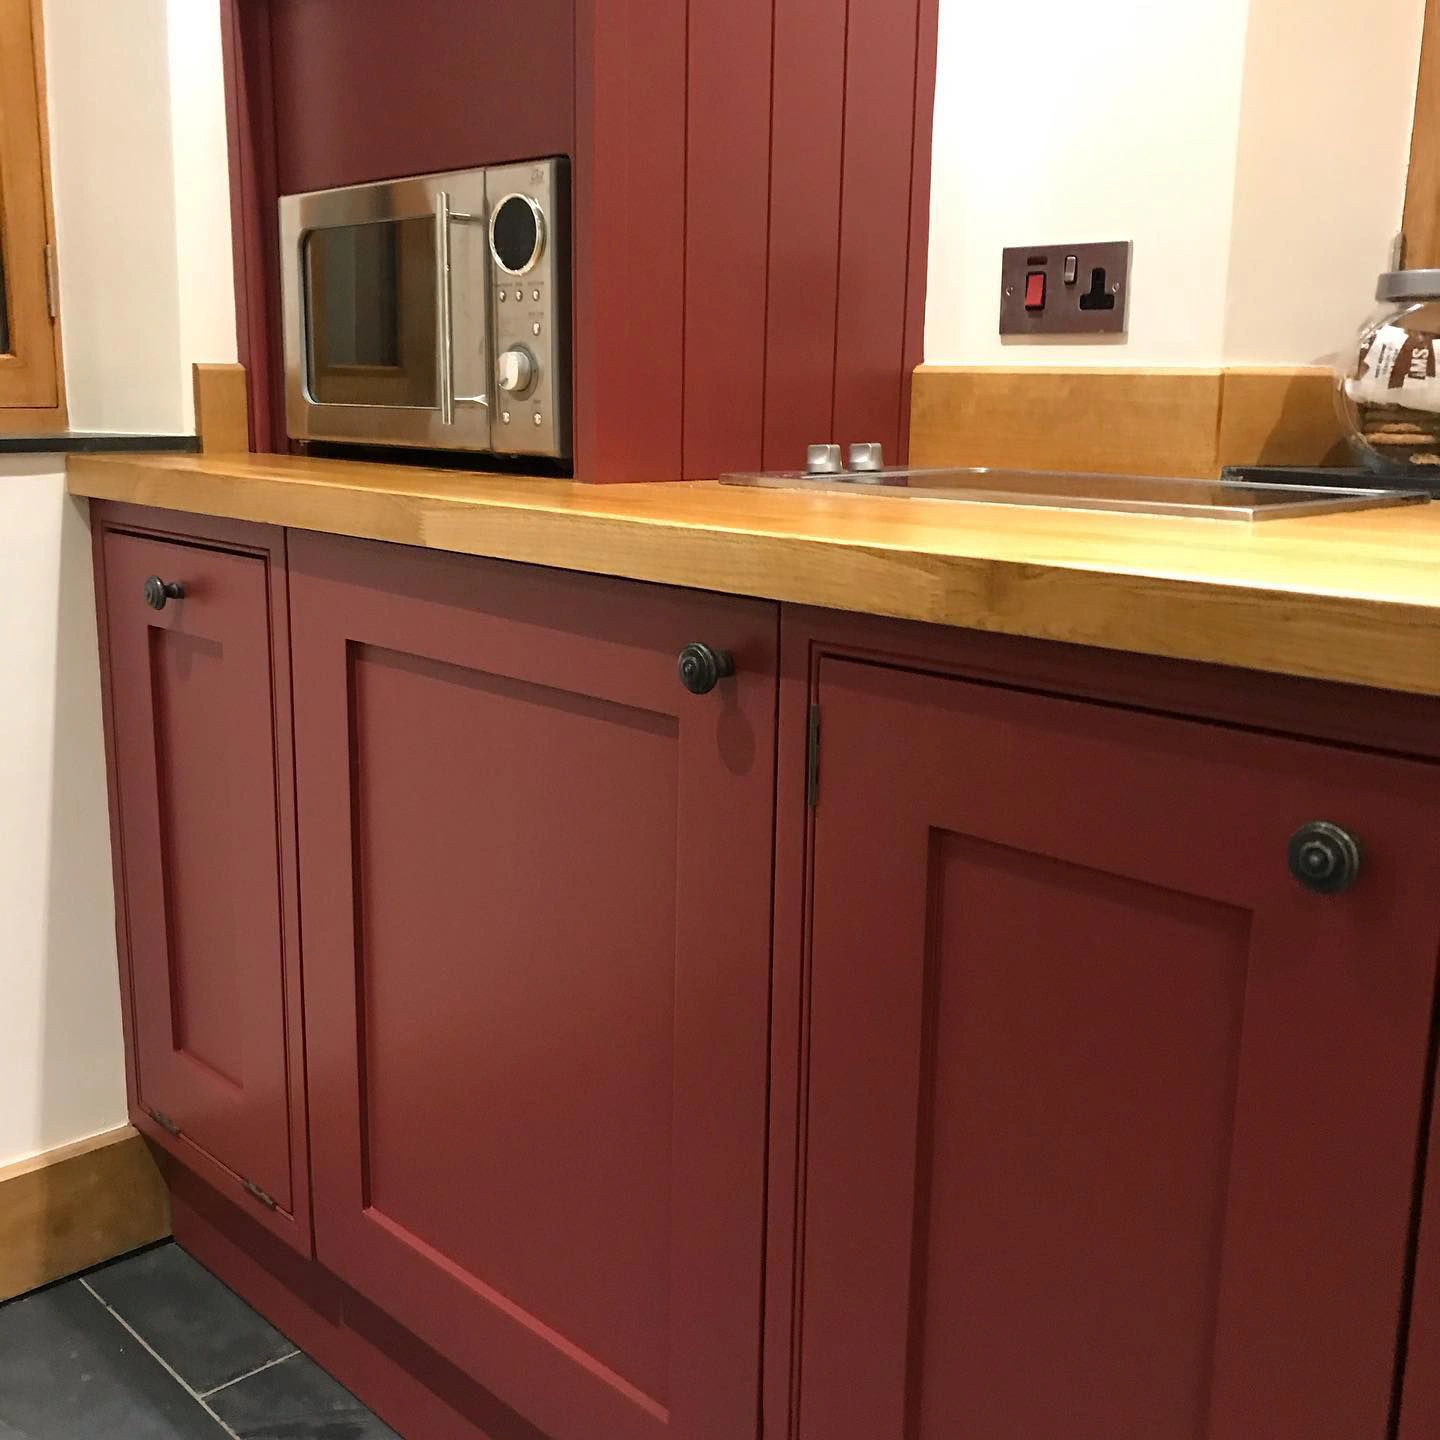 Farrow and Ball Eating Room Red 43 kitchen cabinets